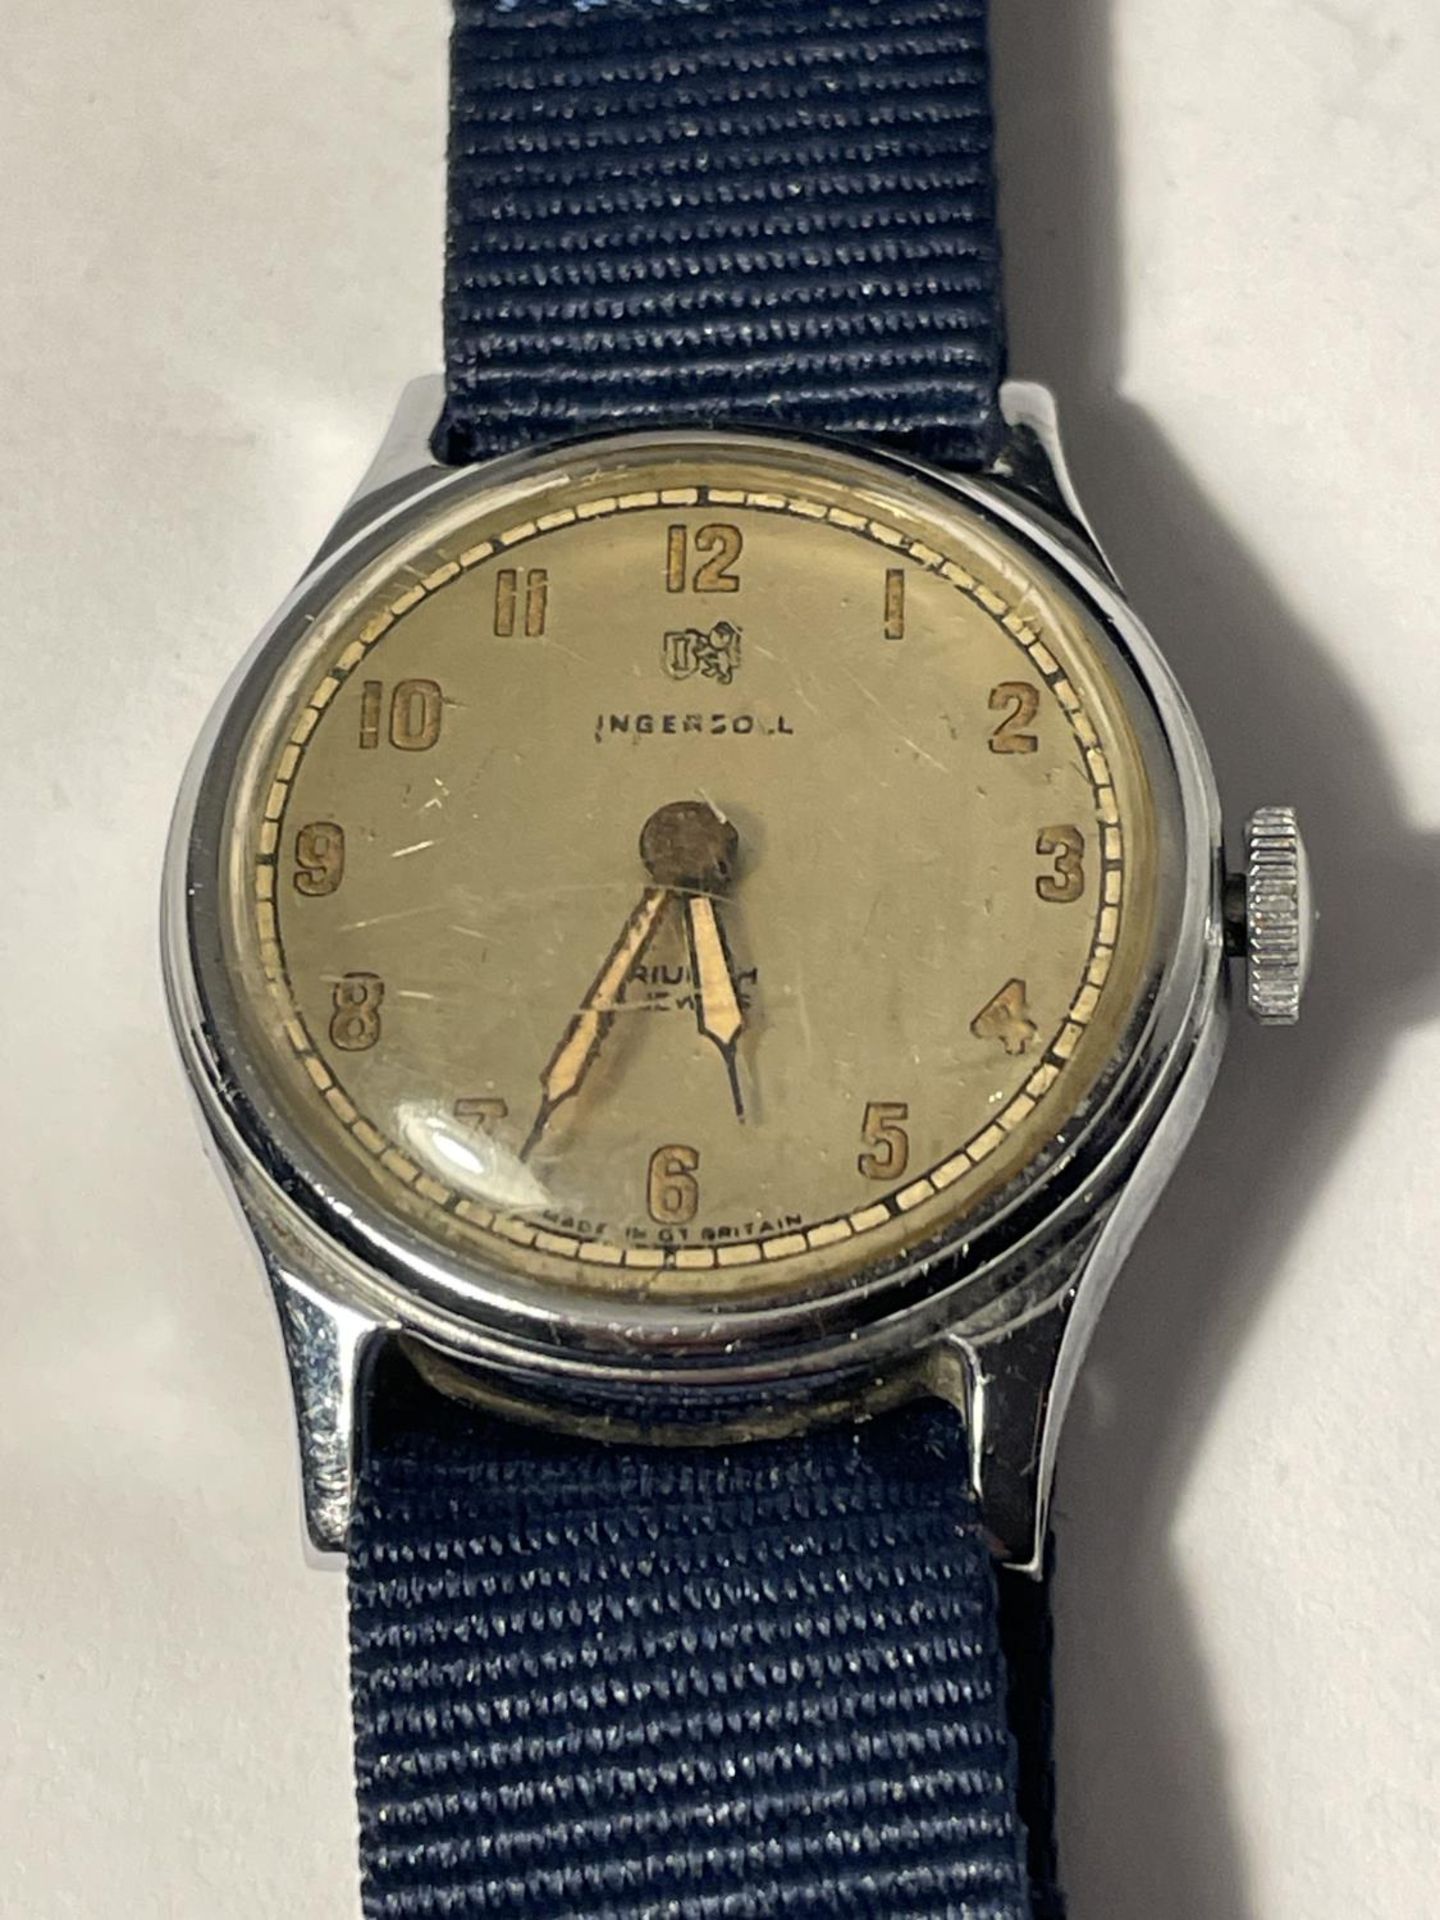 A VINTAGE INGERSOL WATCH WITH NEW STRAP - Image 2 of 3